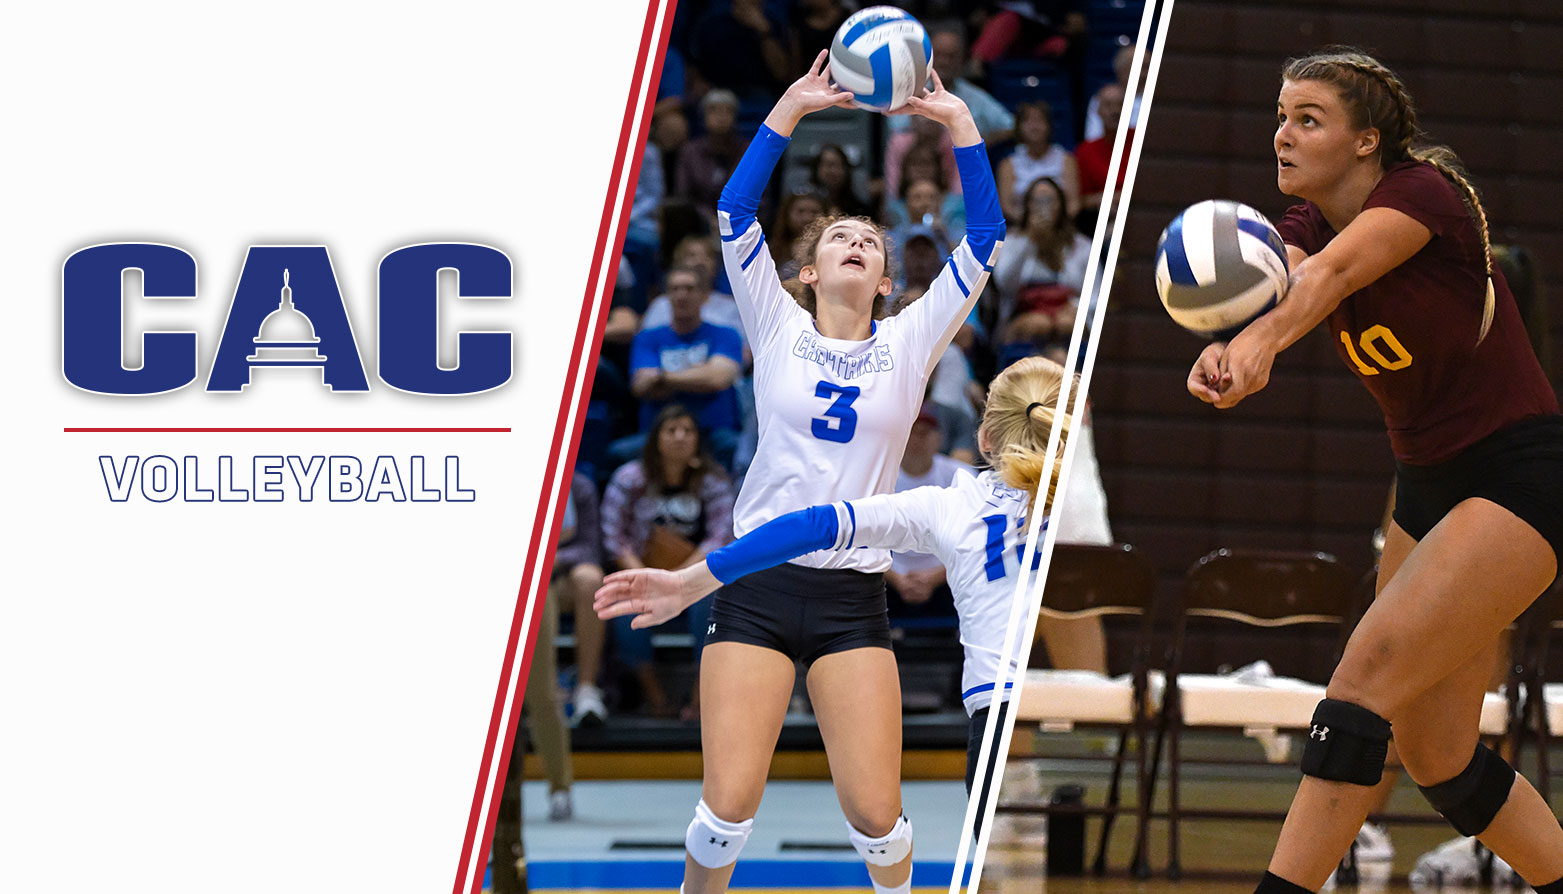 CNUs Carroll & Salisbury's Dougherty Selected CAC Volleyball Players of the Week